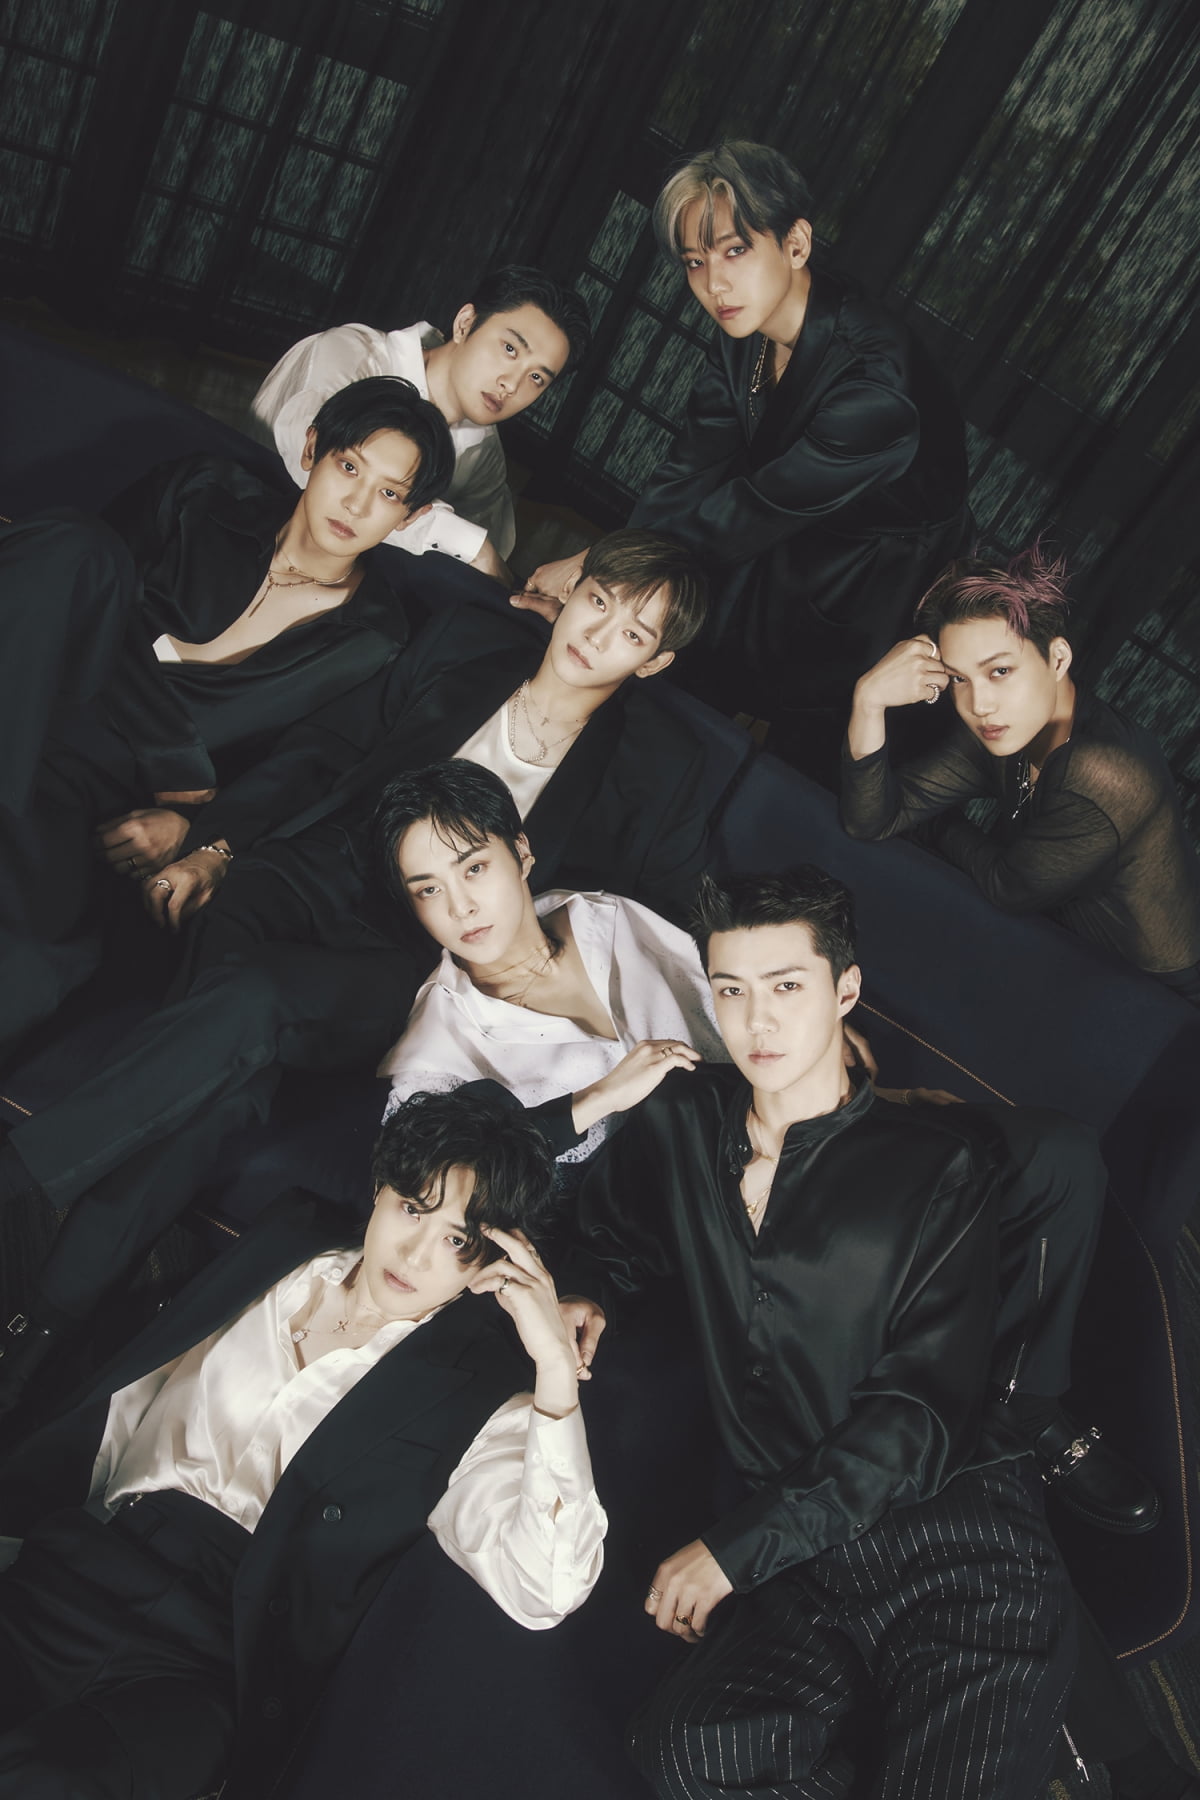 EXO's 'First Snow' tops music charts 10 years after release